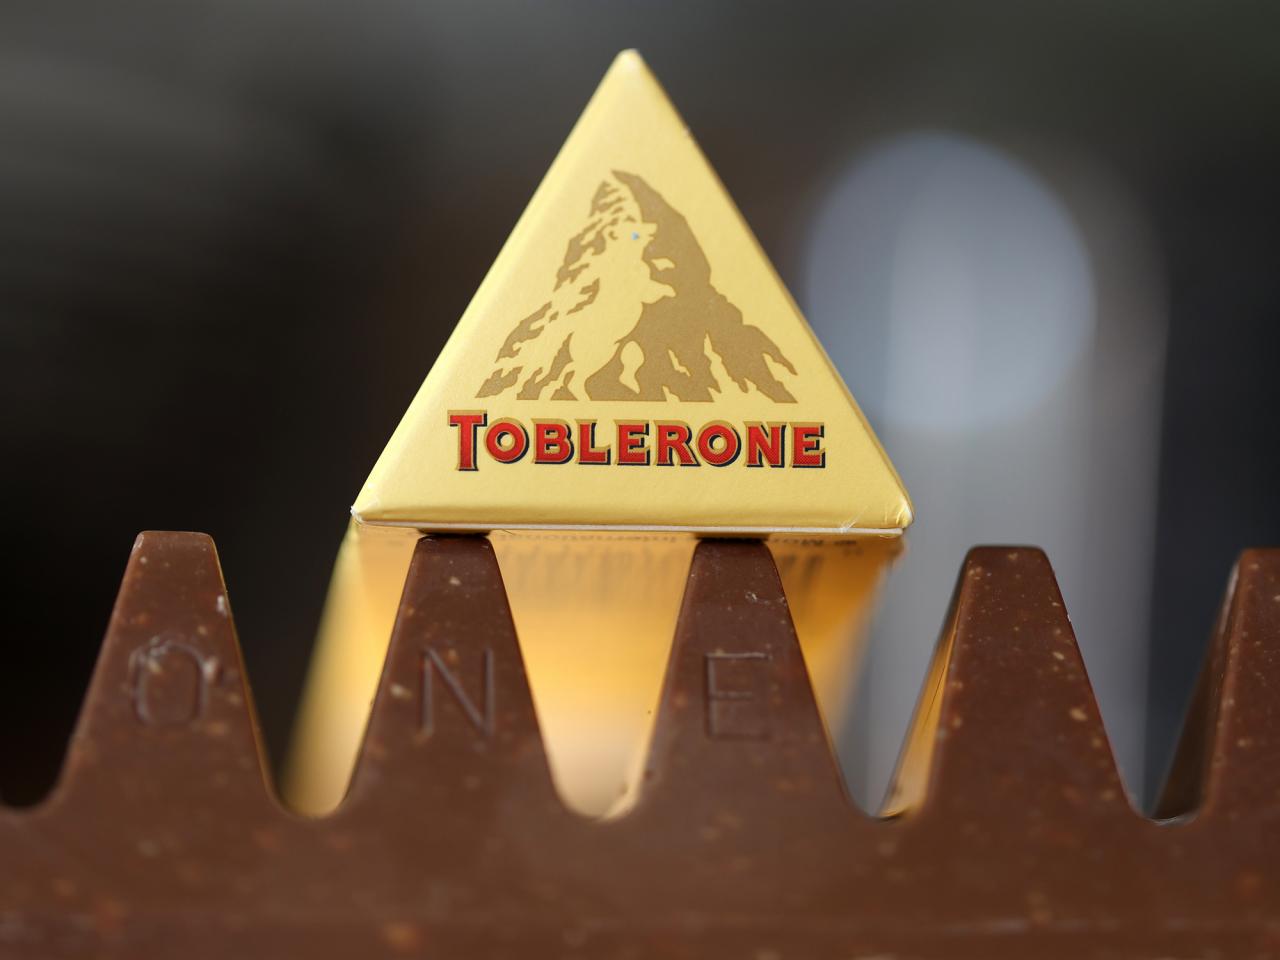 Why Is the Toblerone Package Changing?